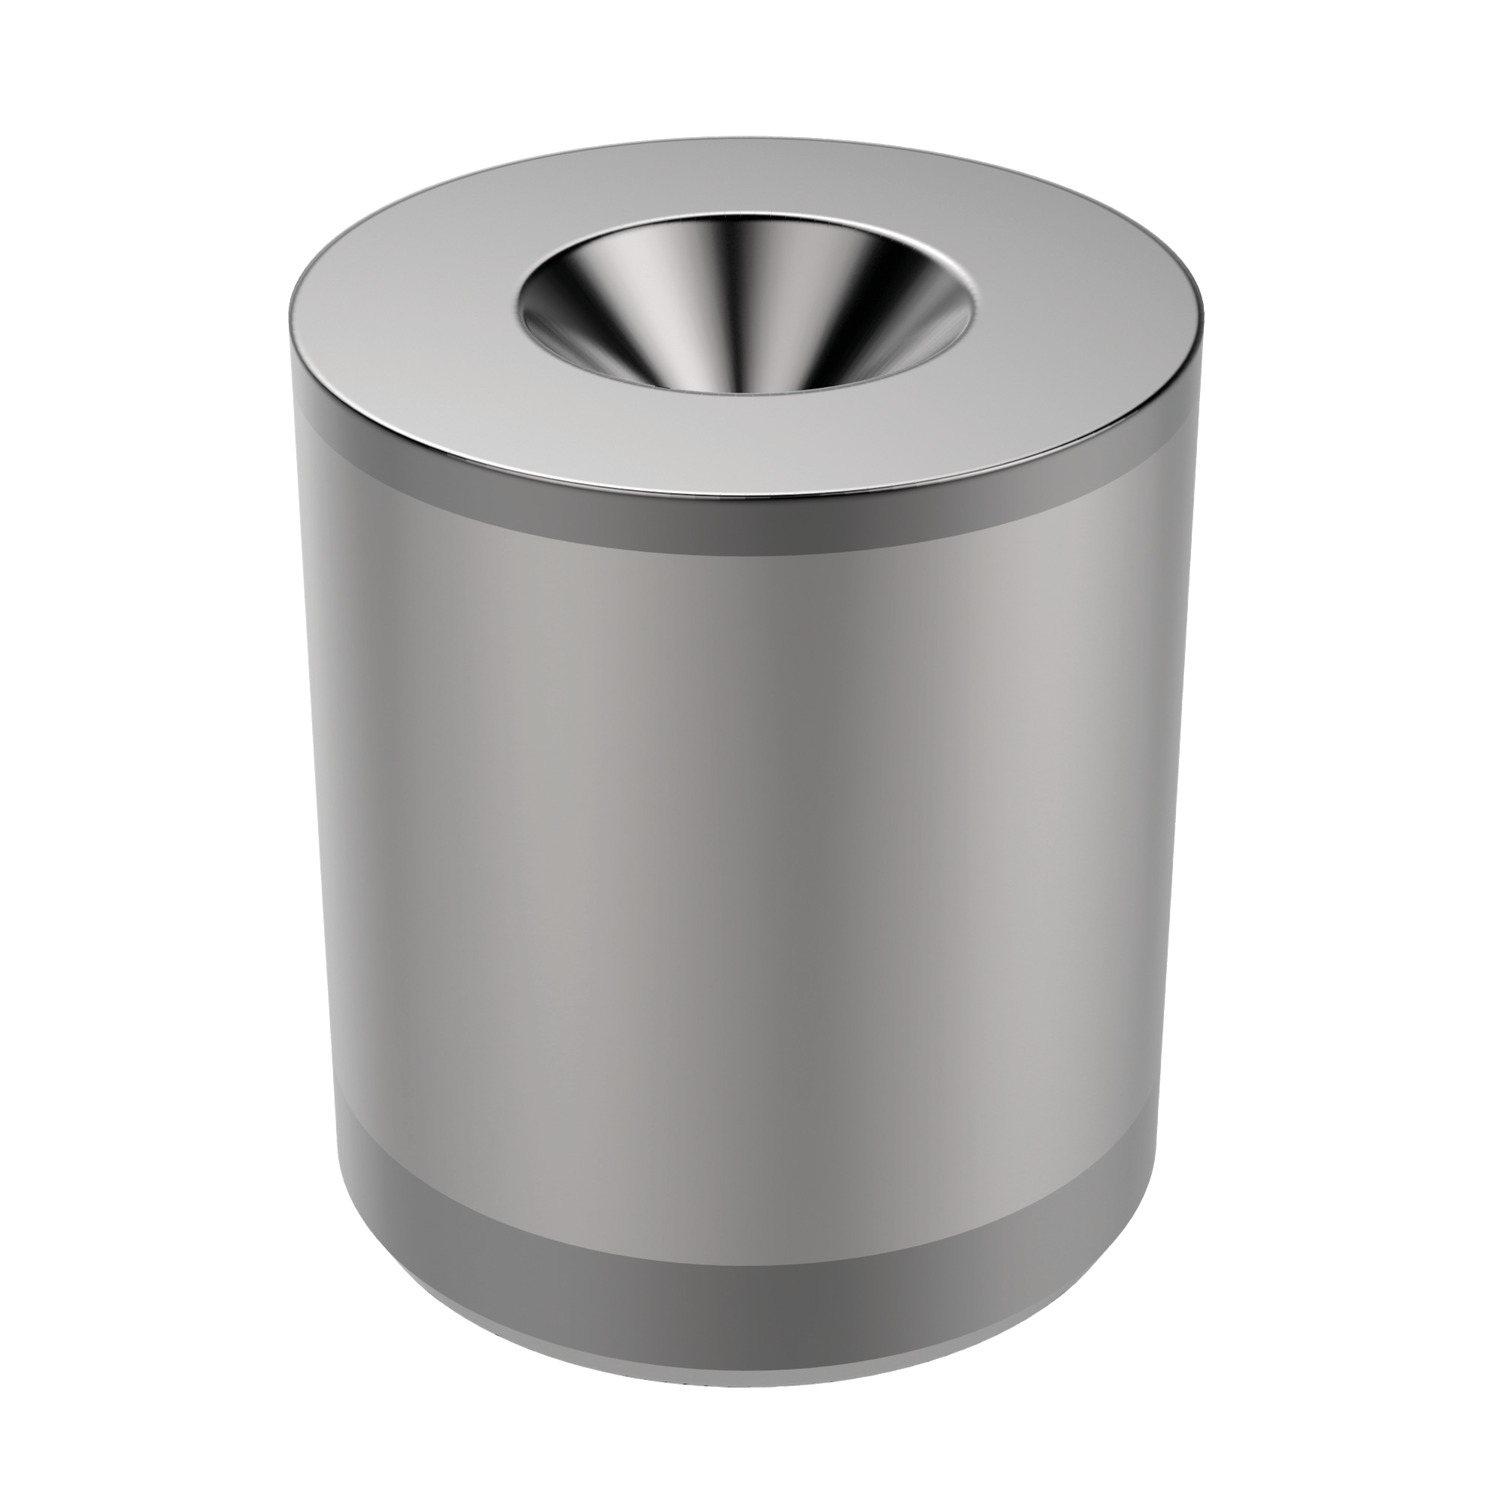 Striker Bushes Striker bushes for spring plungers. Available in hardened steel. Striker bushings are used together with spring plungers when a contact surface is required with high resistance.